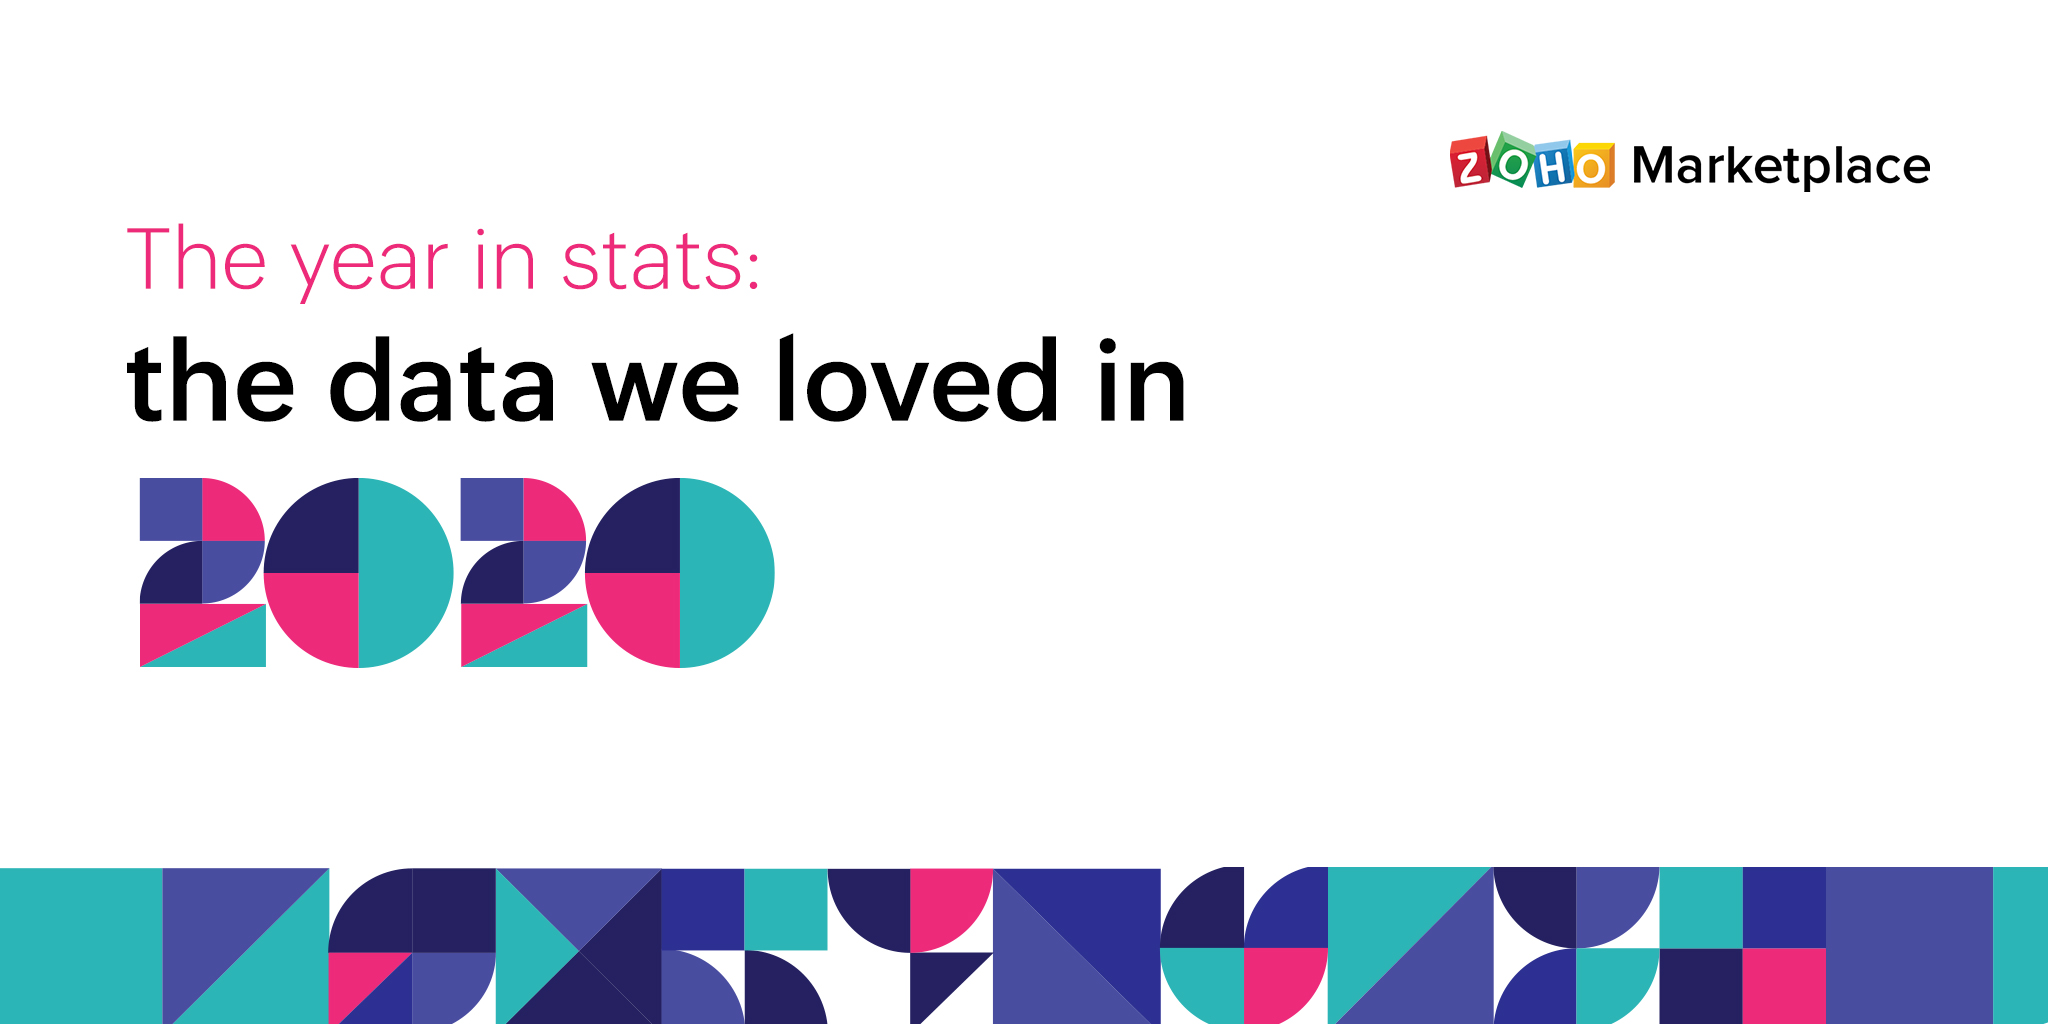 The year in stats: the data we loved in 2020